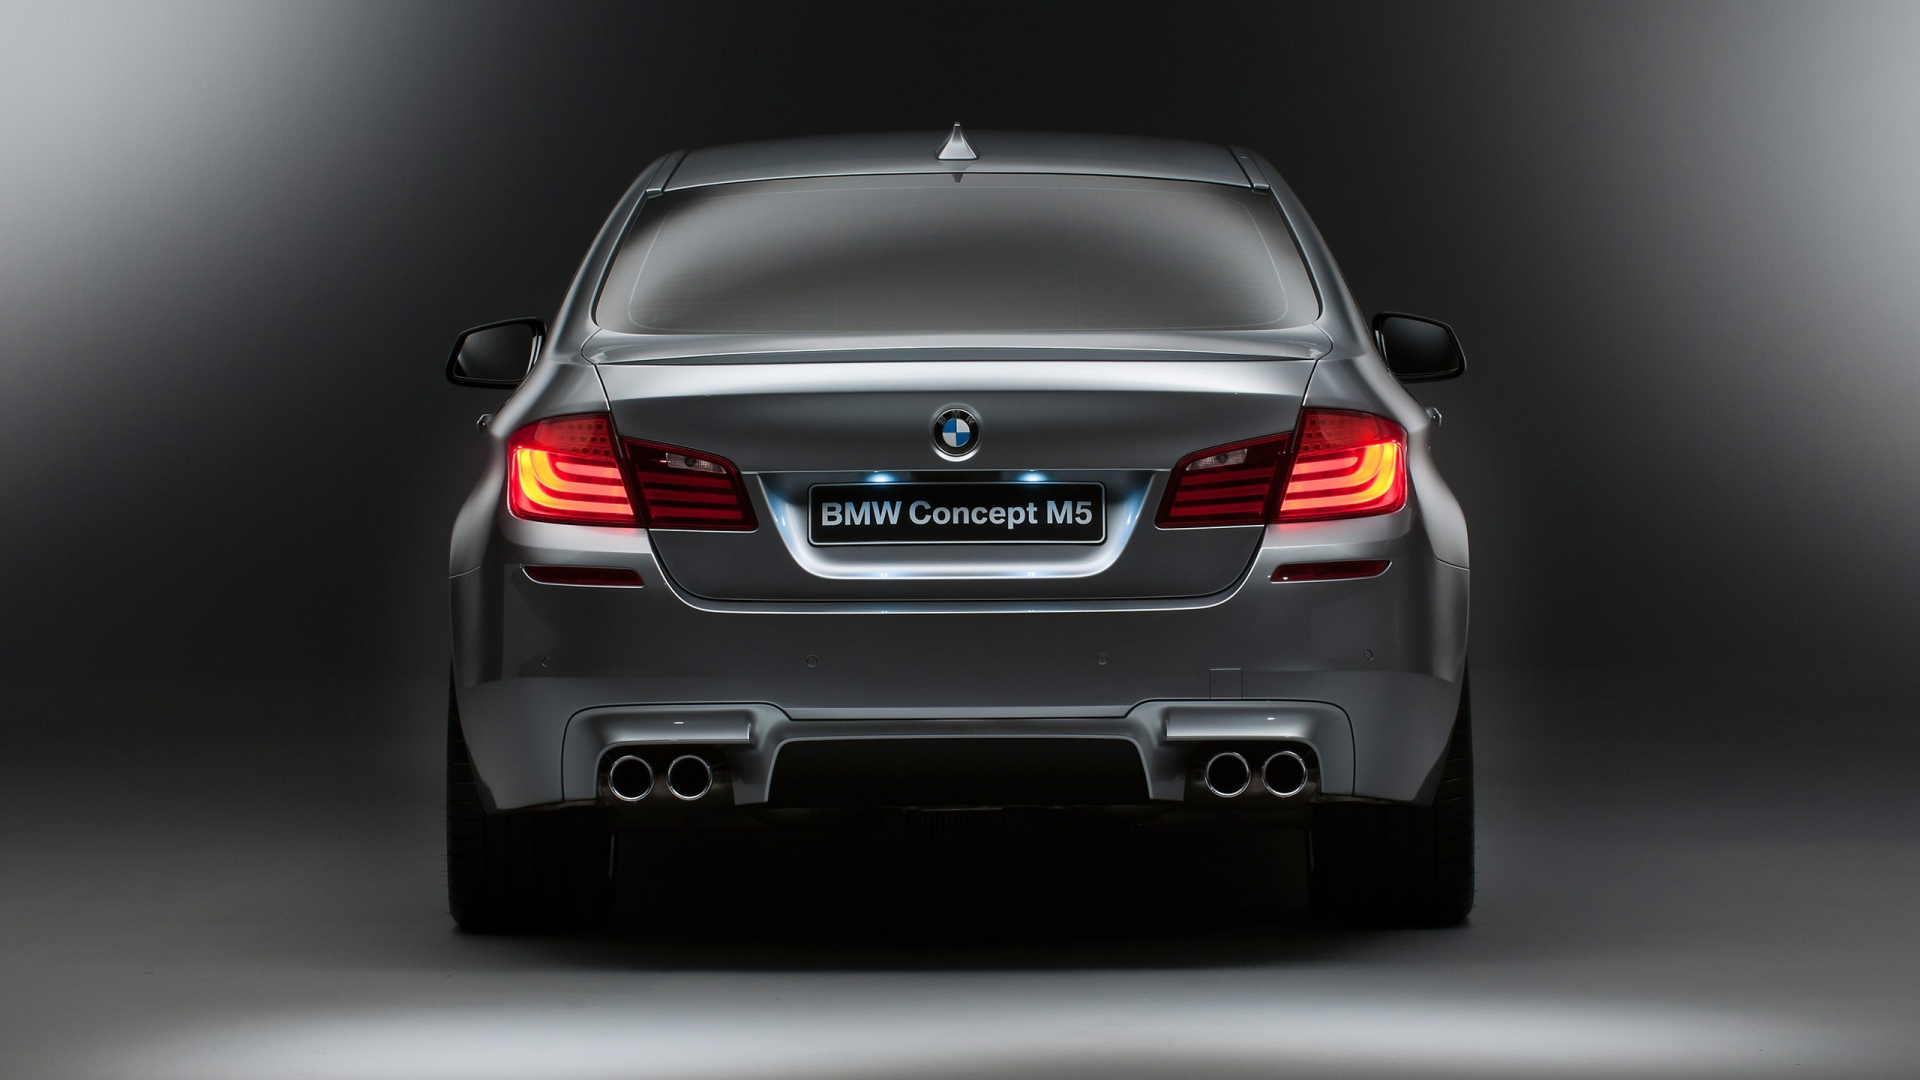 BMW M5 Concept 2012 Rear for 1920 x 1080 HDTV 1080p resolution